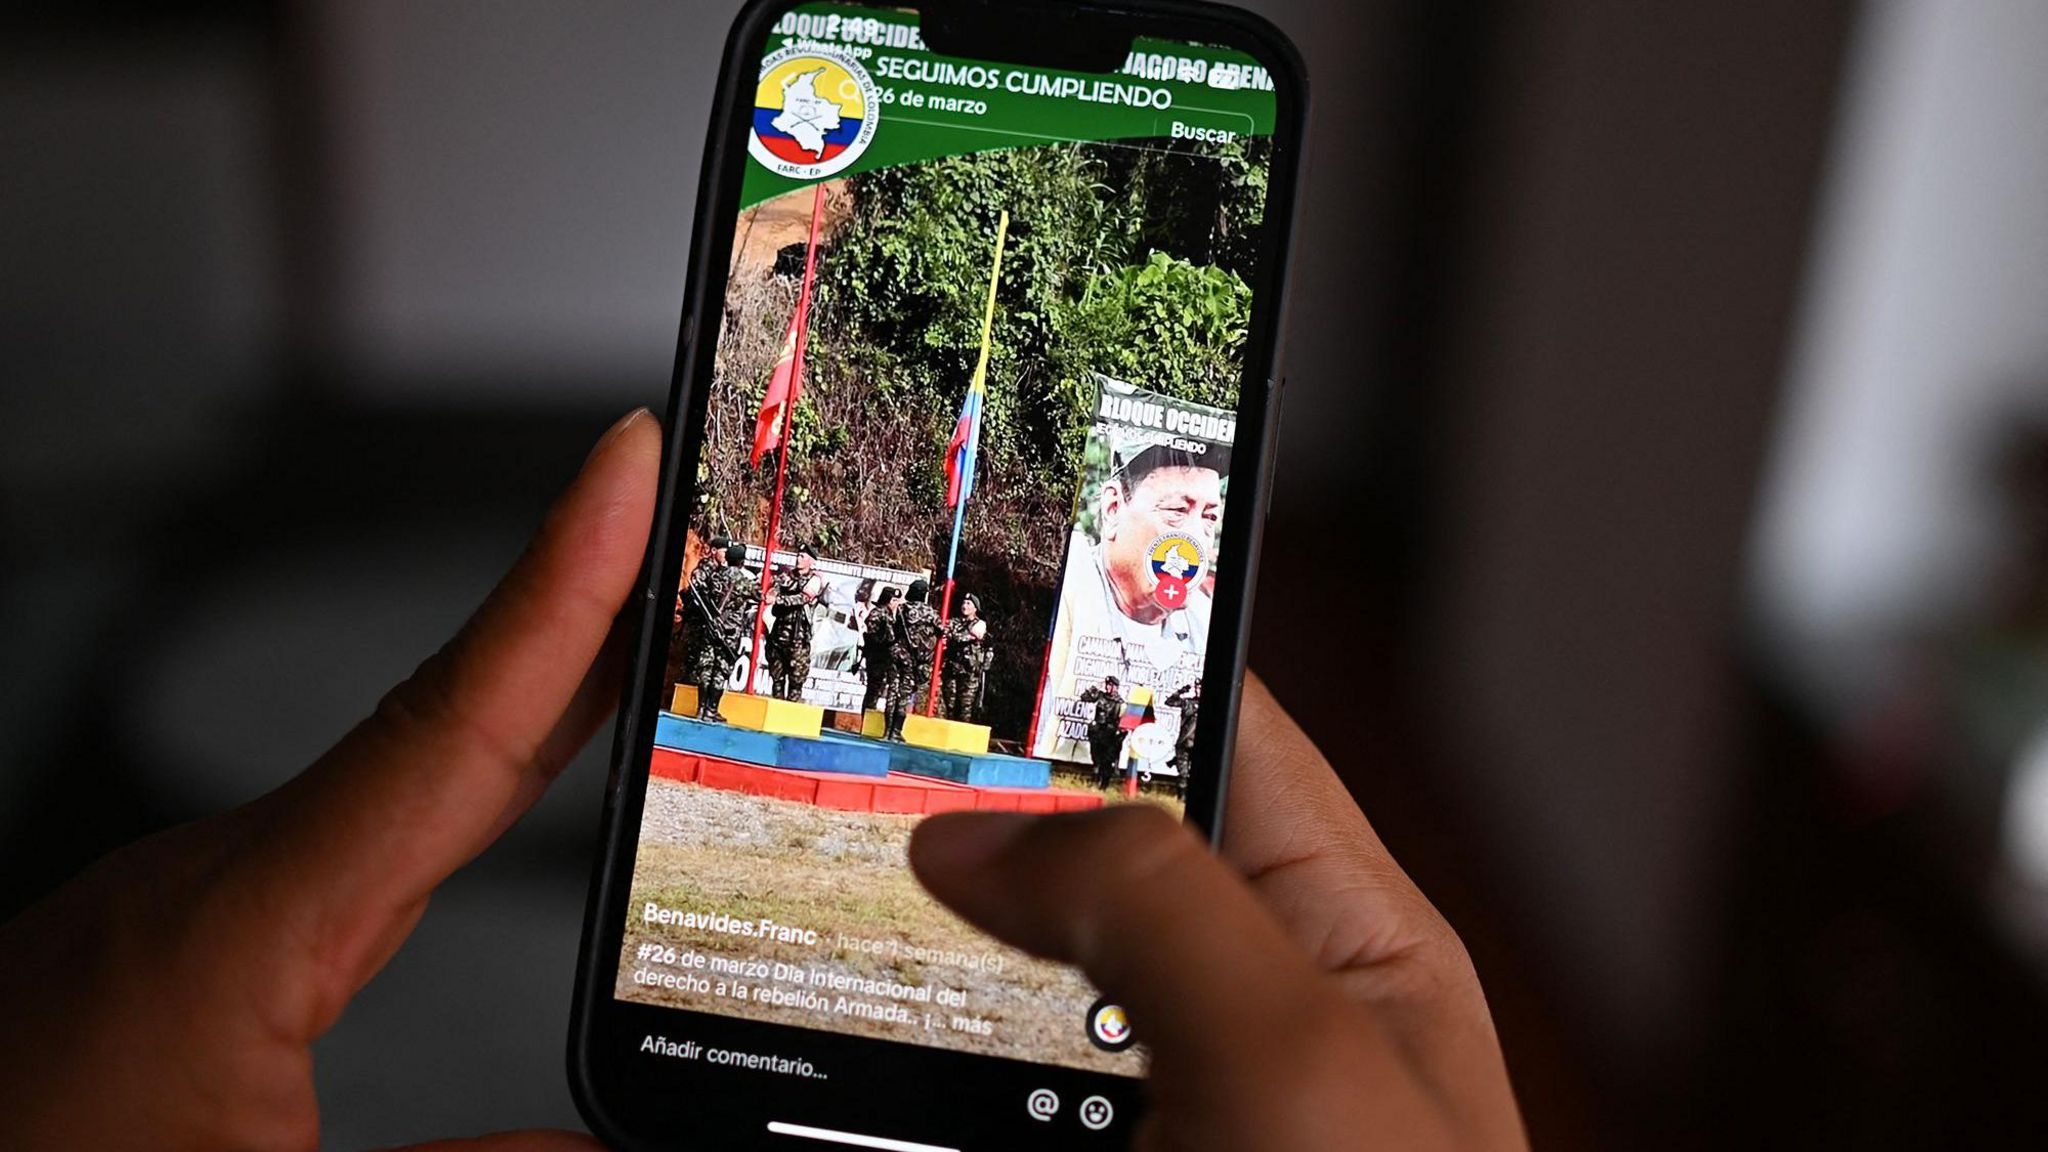 An image of a hand holding a mobile phone showing a TikTok account that promotes one of the dissident armed groups in Colombia.